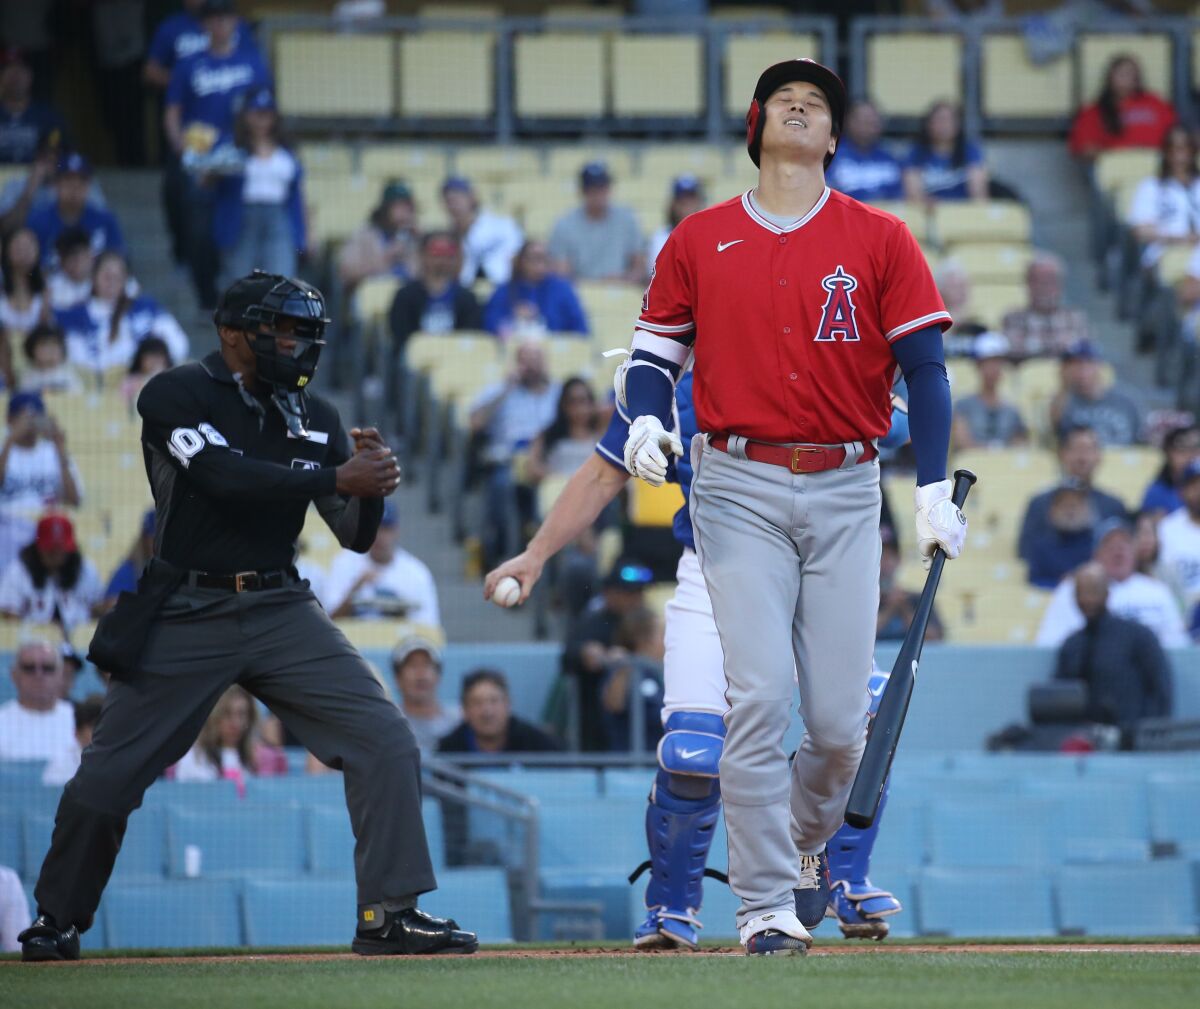 Angels' Shohei Ohtani thought he was getting a walk but struck out instead against the Dodgers.